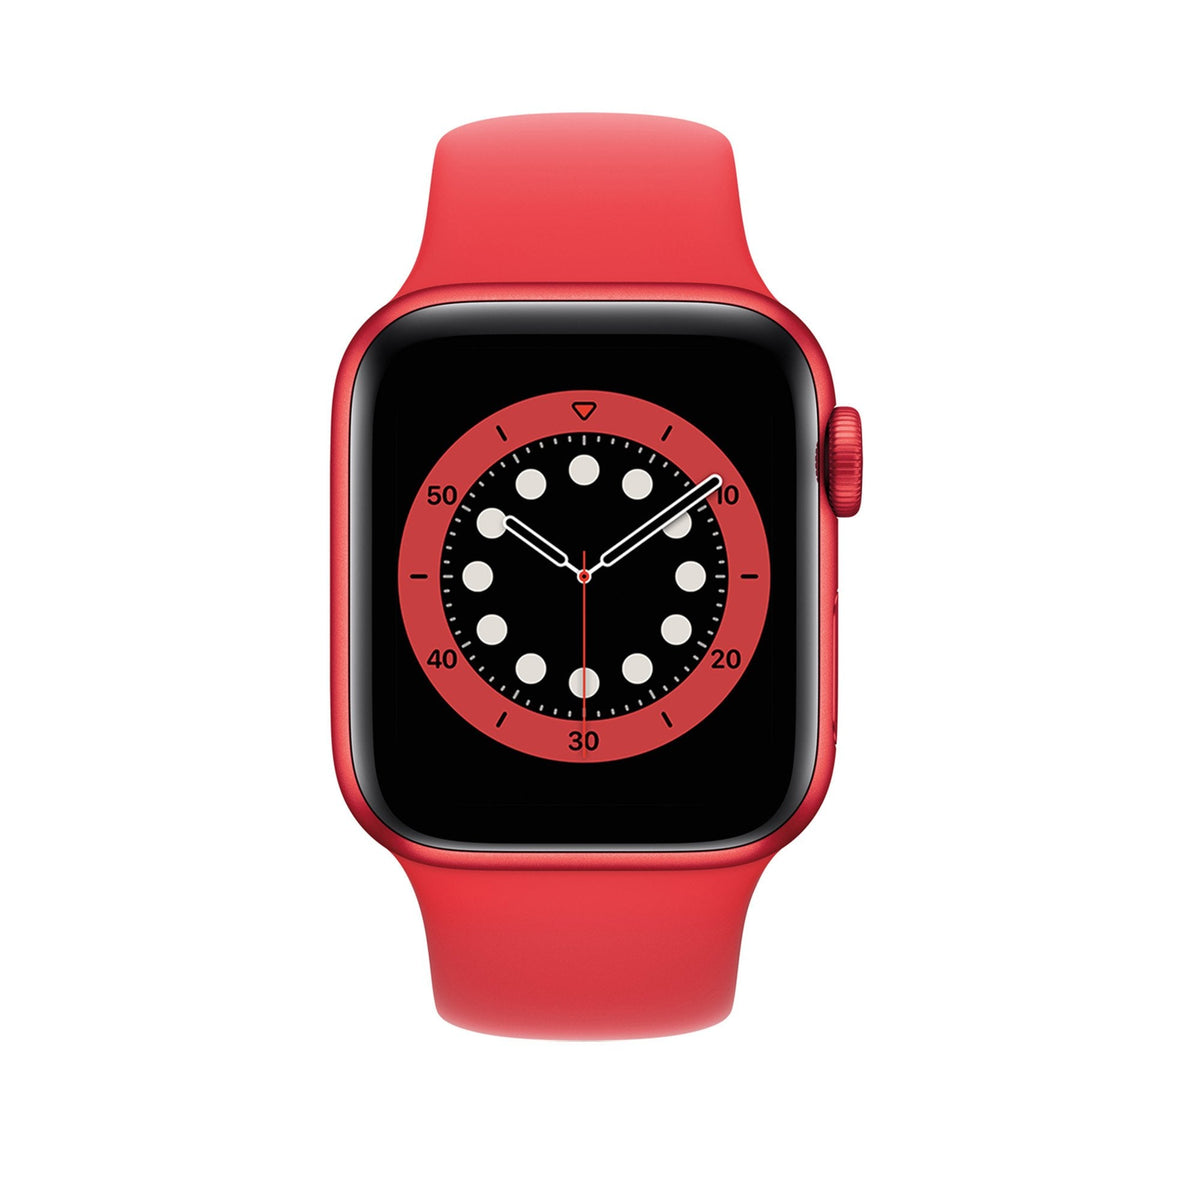 Apple Watch Series 6 44mm | Red | Fair Condition